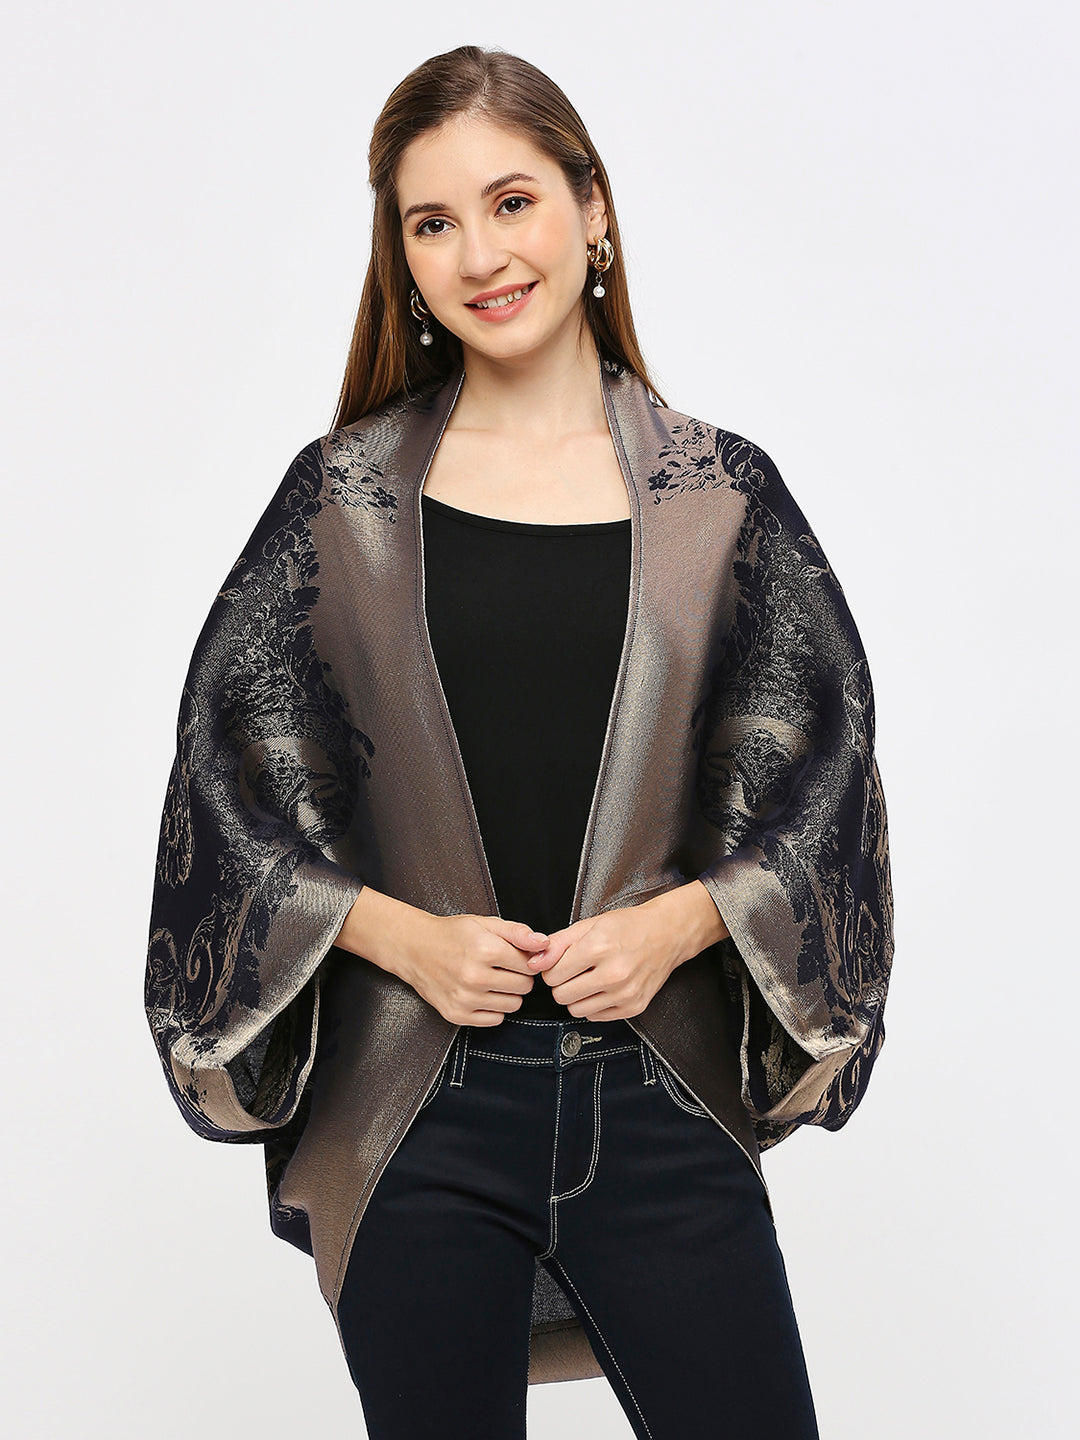 Brocade French Patterned Navy Cape